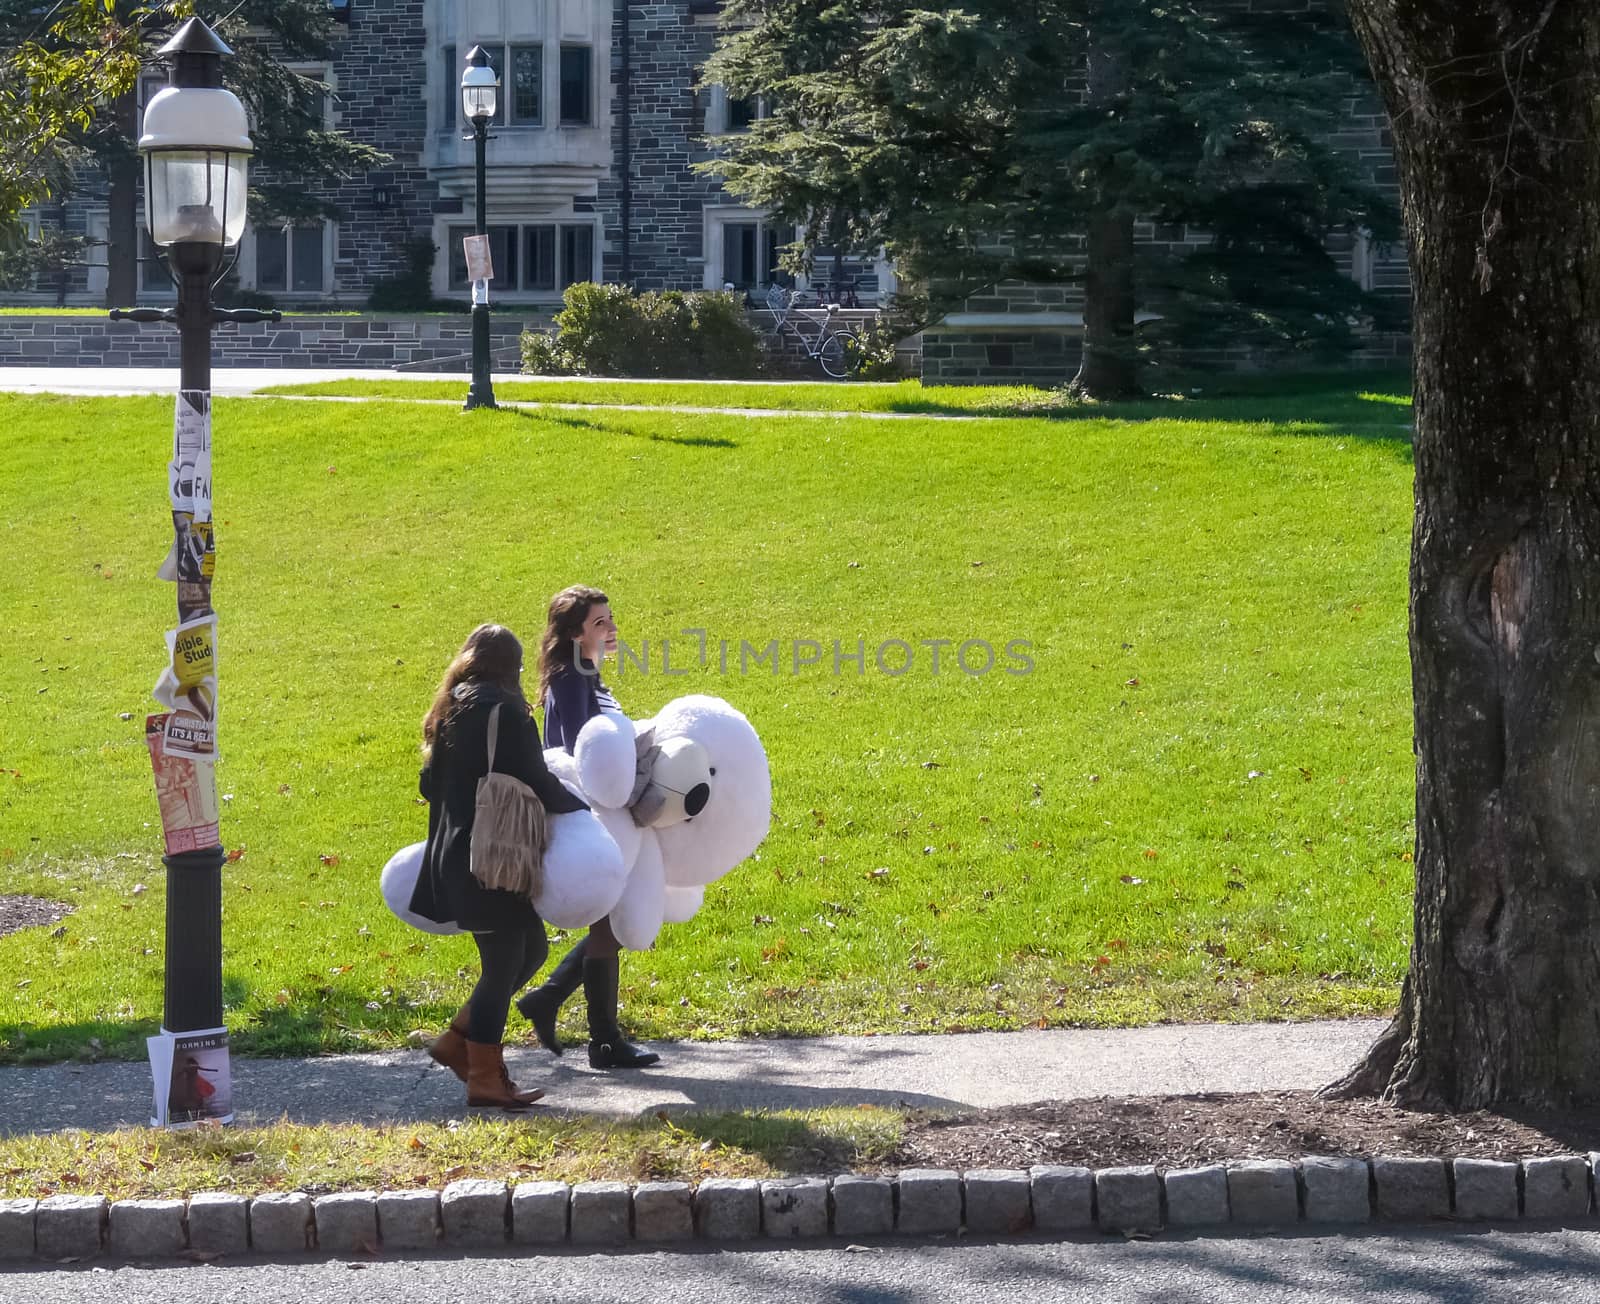 Campus of Princeton University - Students Carrying Big White Toy by wit_gorski